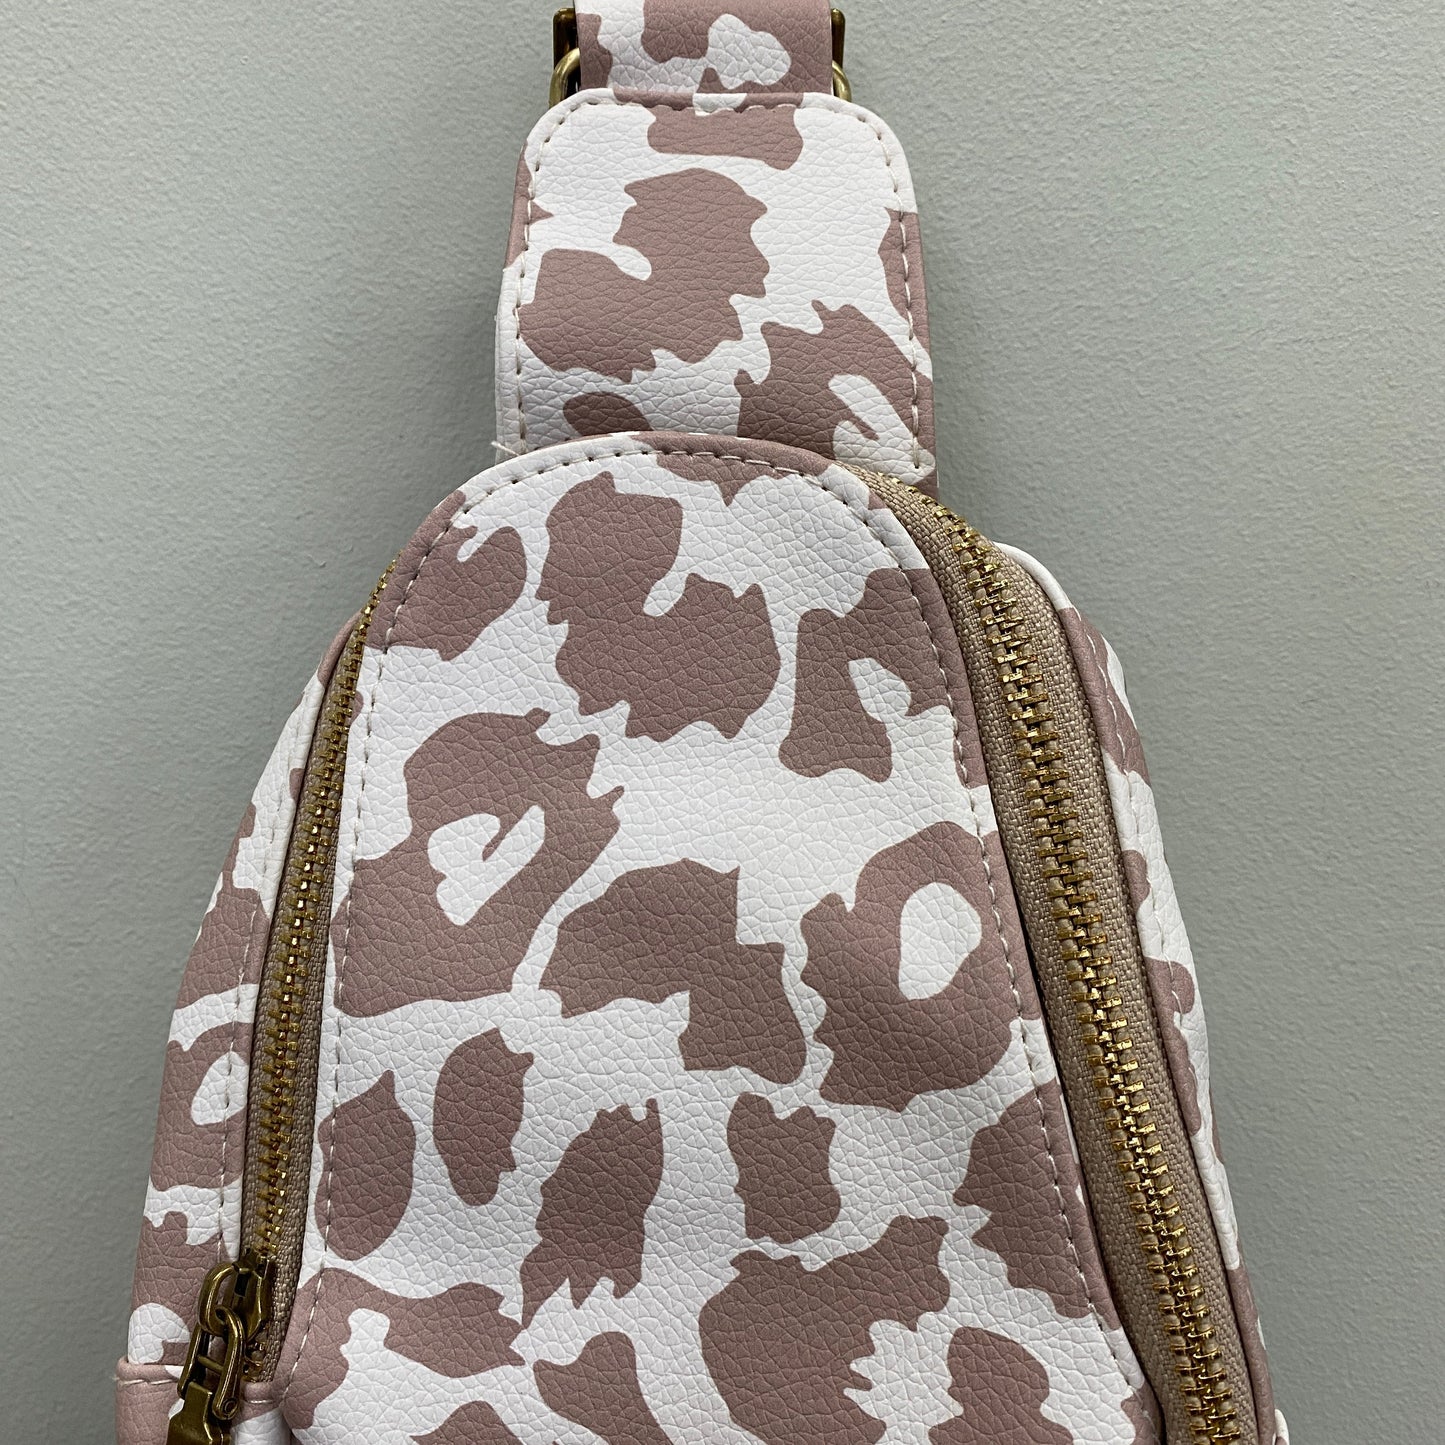 *NEW Sling Crossbody - White Taupe Leopard